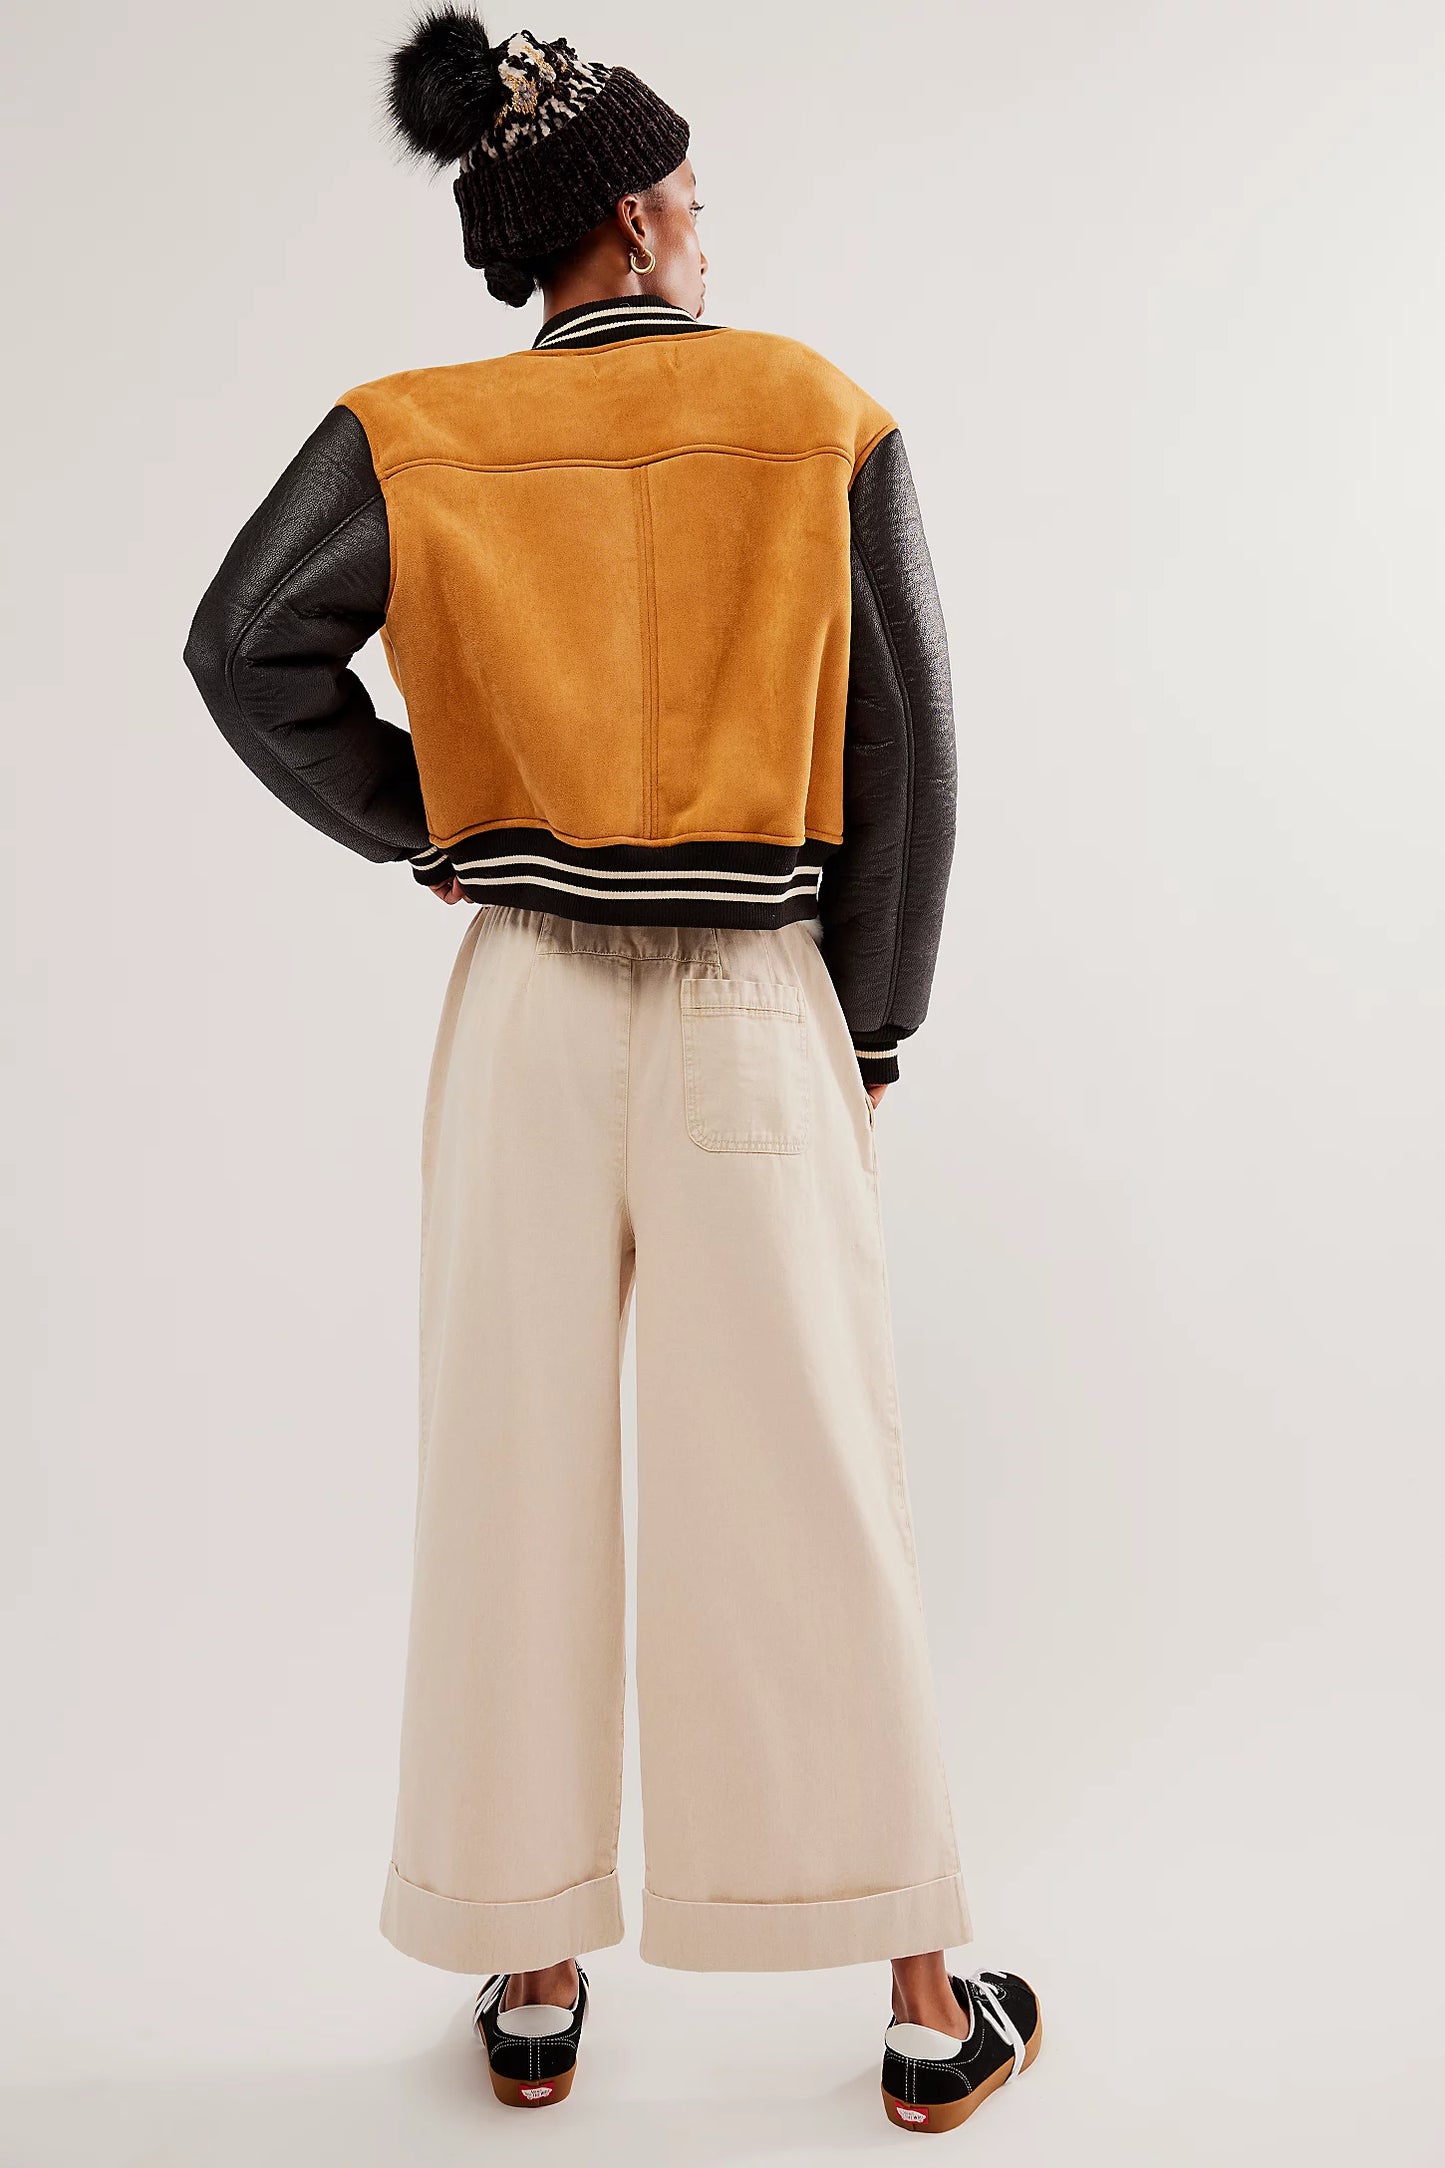 After Love Cuff Pant